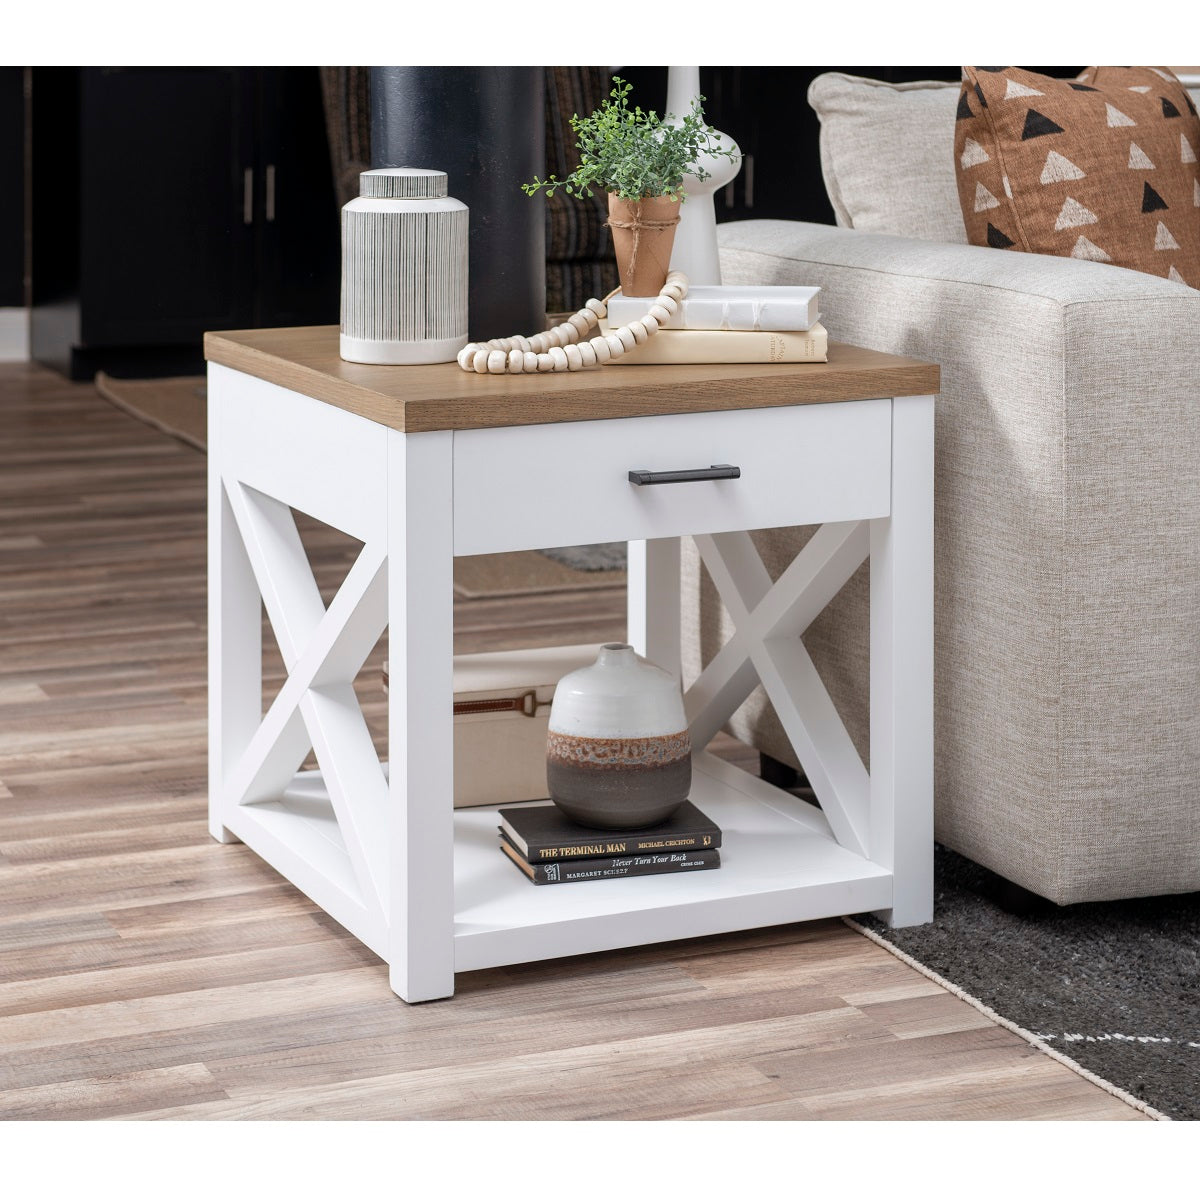 Franklin End Table. Harvest oak top on white oak veneer attached to a painted white base. X motif throughout entire collection. One drawer with aged matte black handle. One shelf. 